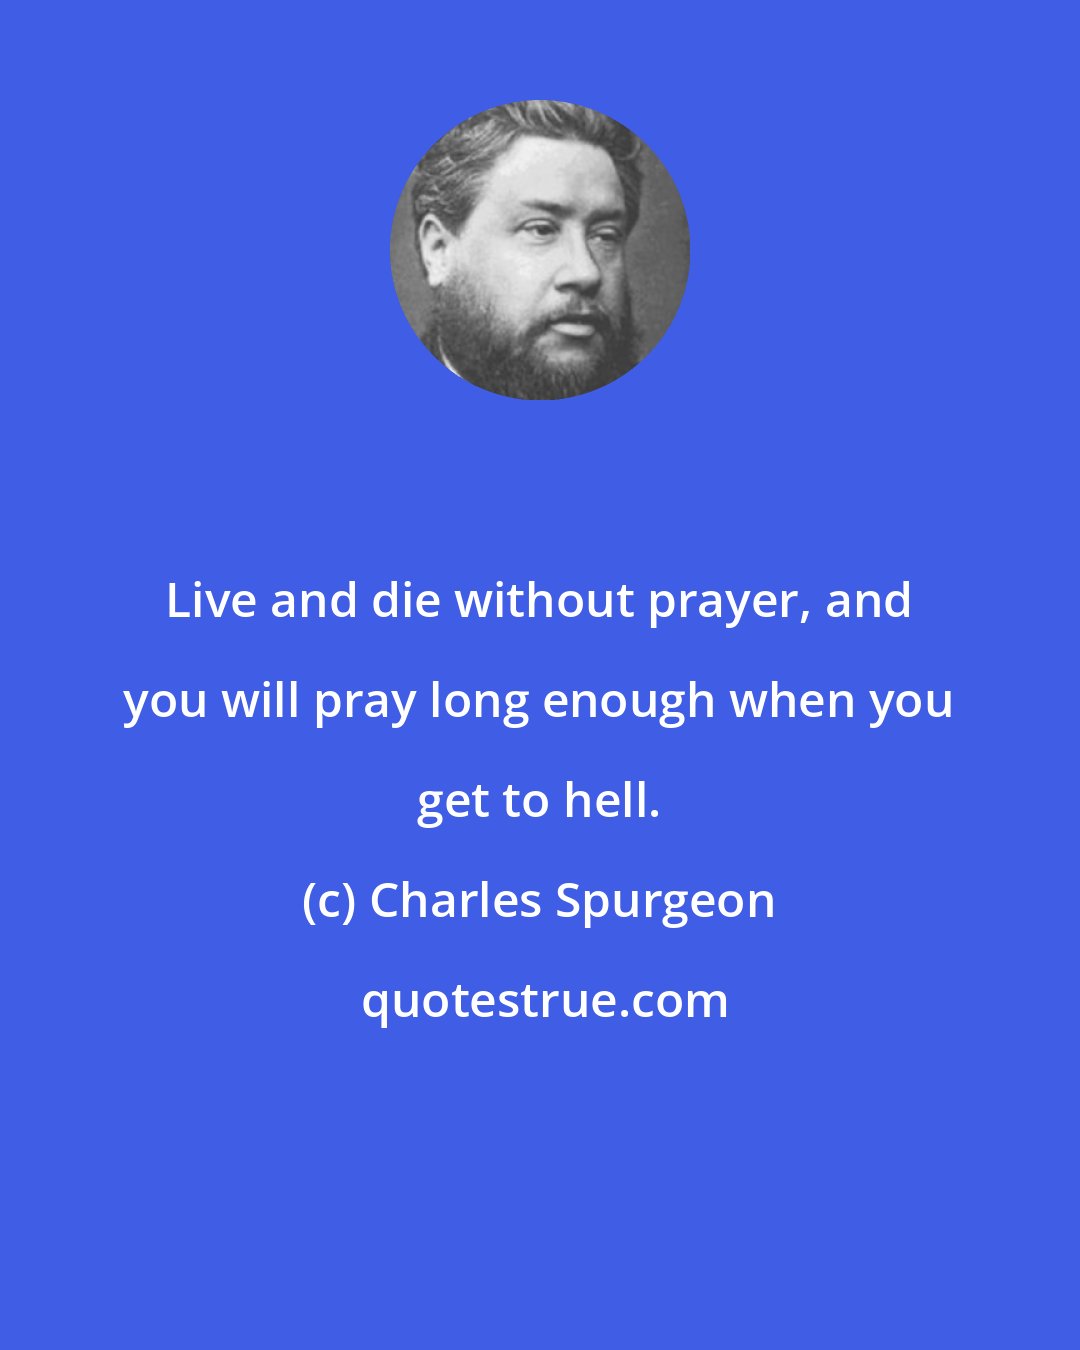 Charles Spurgeon: Live and die without prayer, and you will pray long enough when you get to hell.